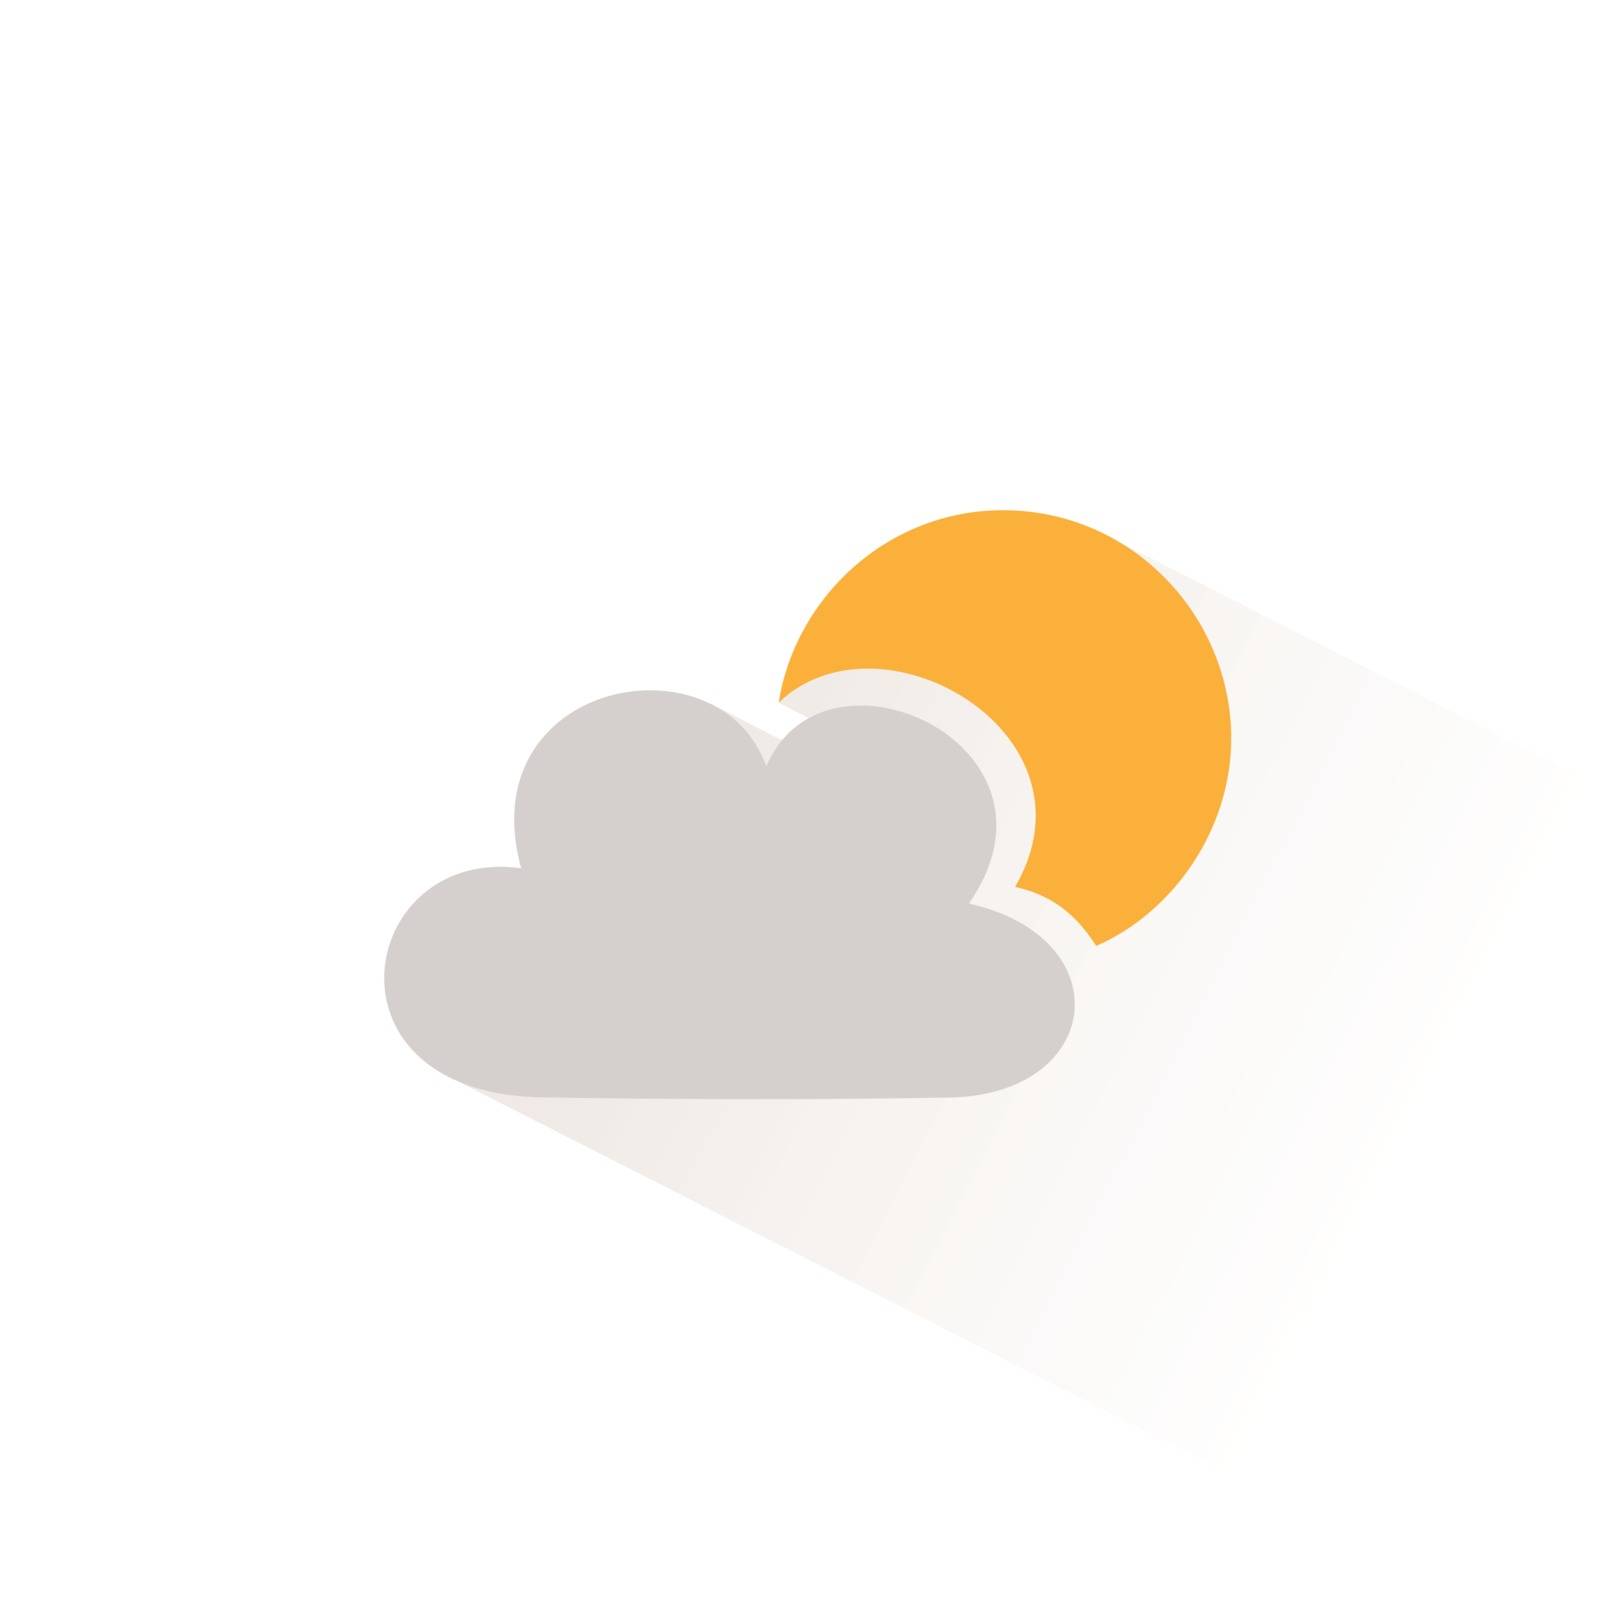 Sun and cloud icon with shadow. Flat vector illustration by Imaagio